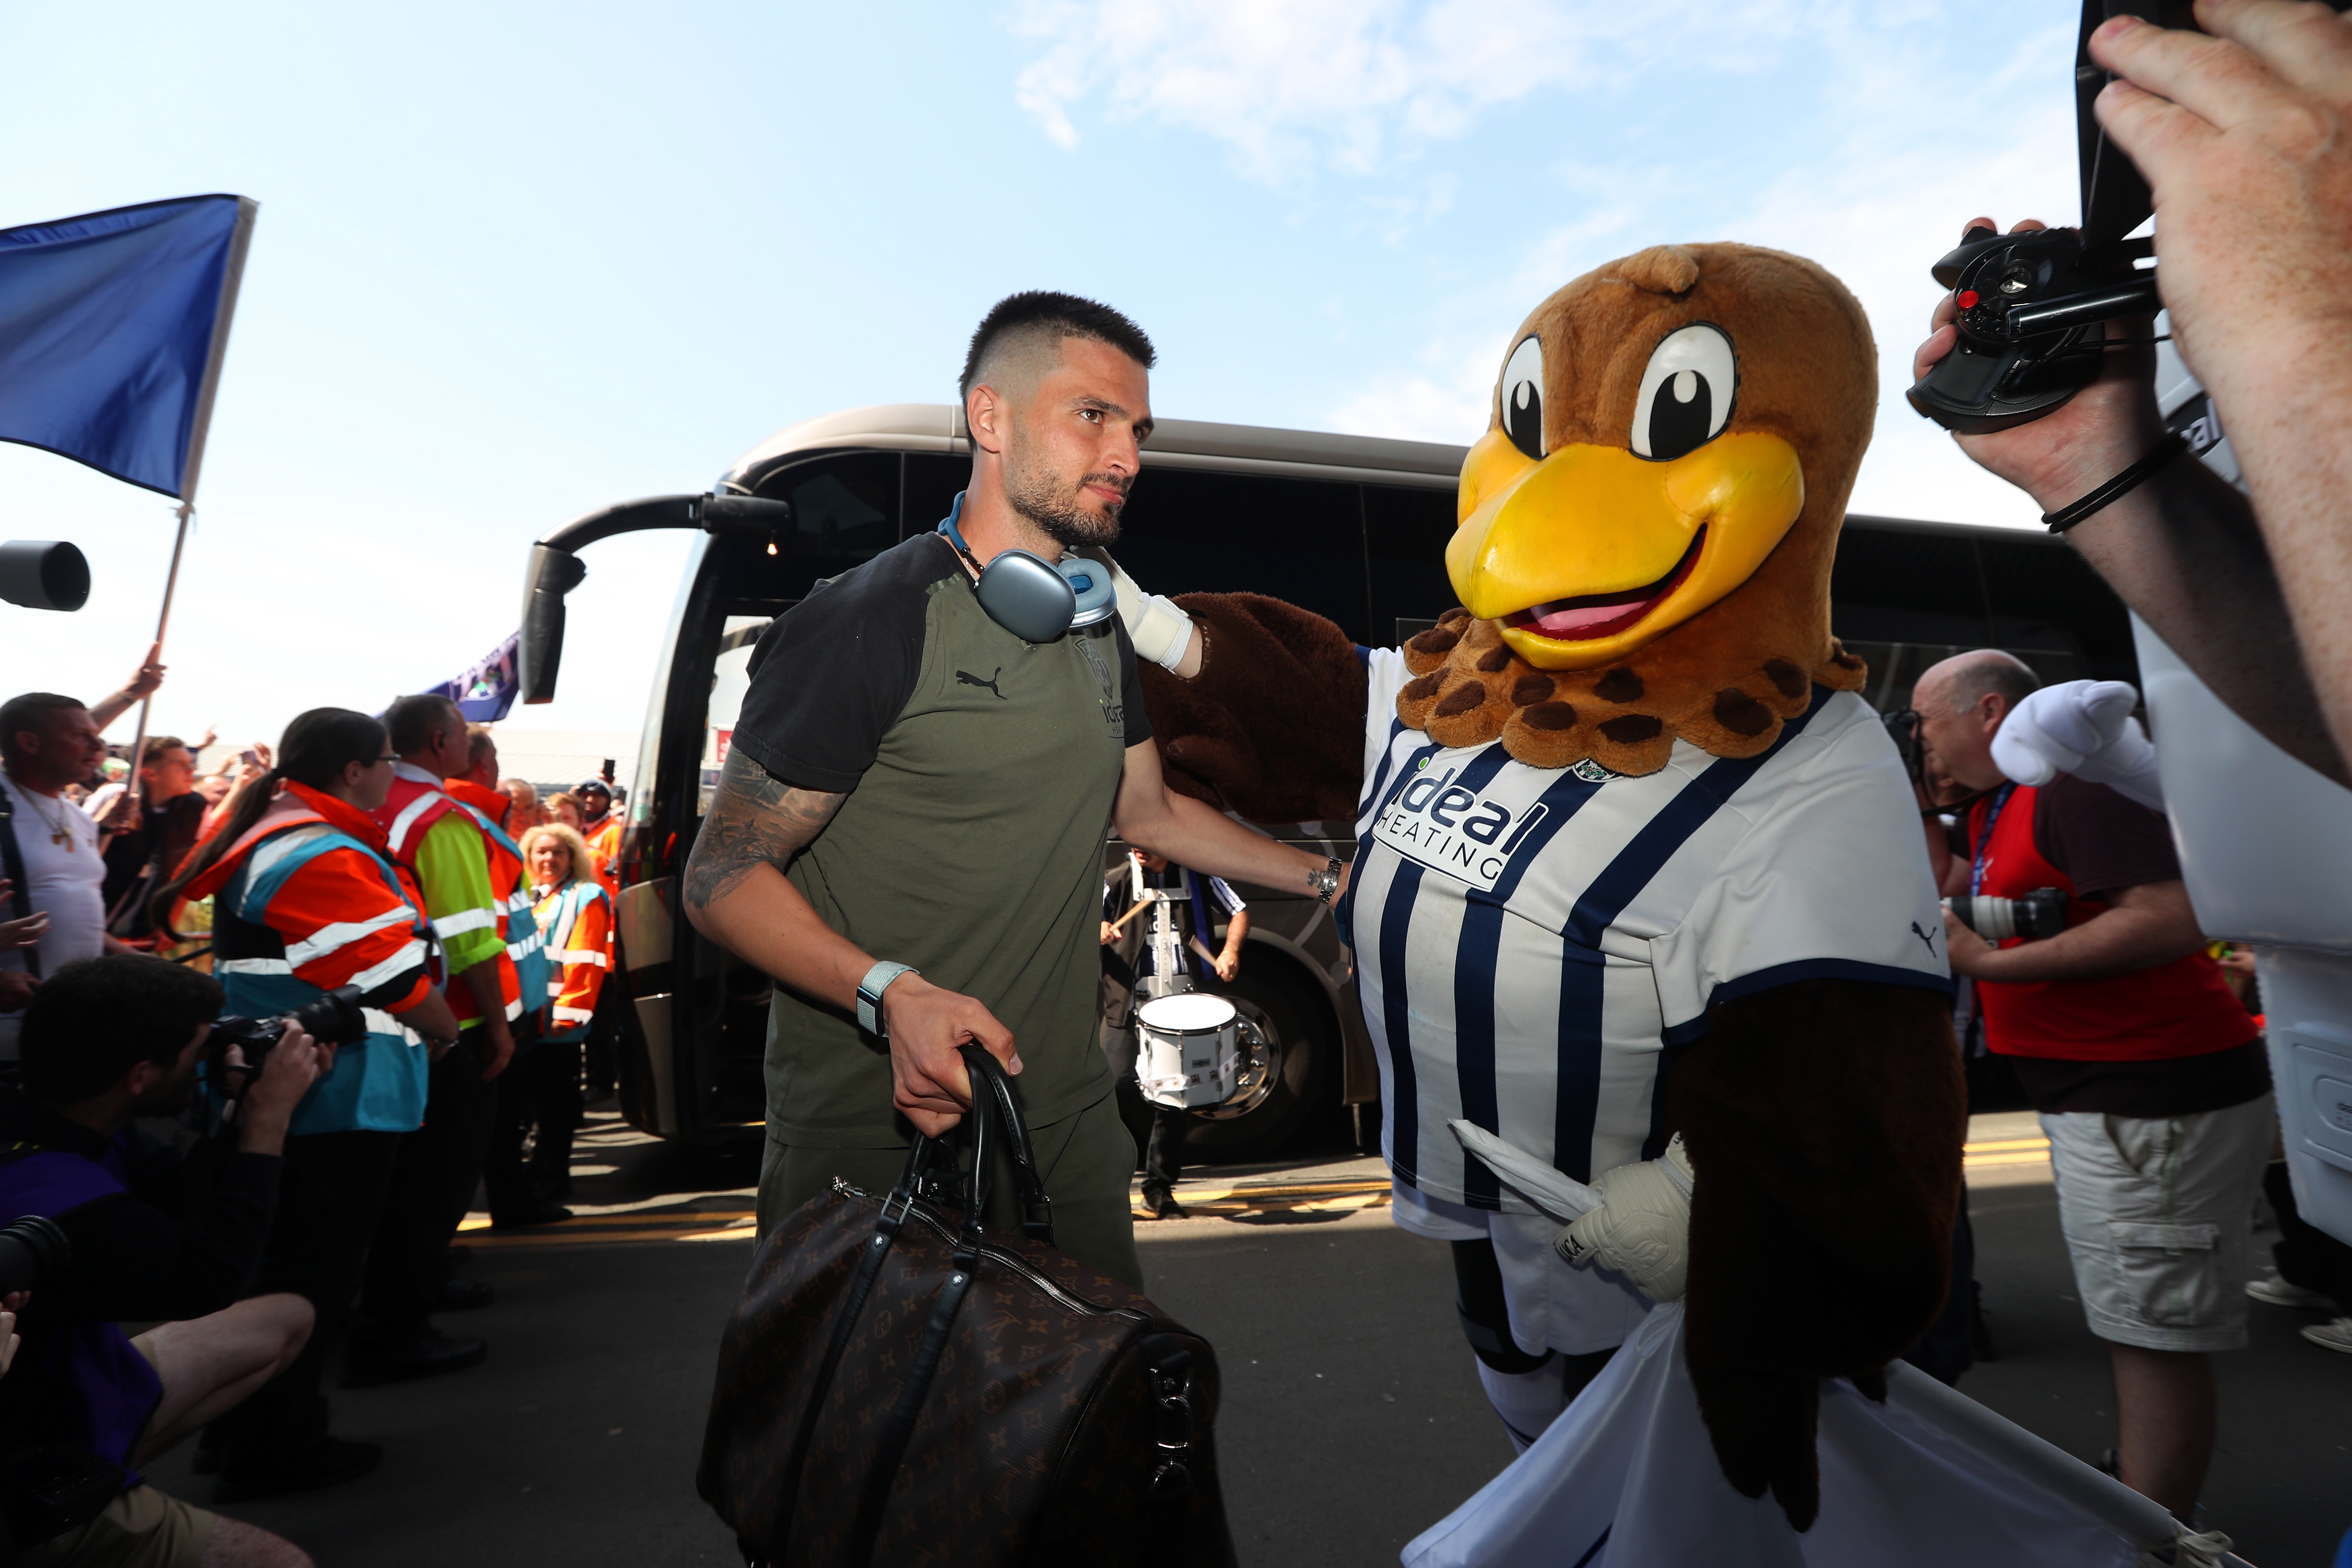 Okay Yokuslu is greeted by Baggie Bird upon arrival at The Hawthorns before Albion's game with Southampton 